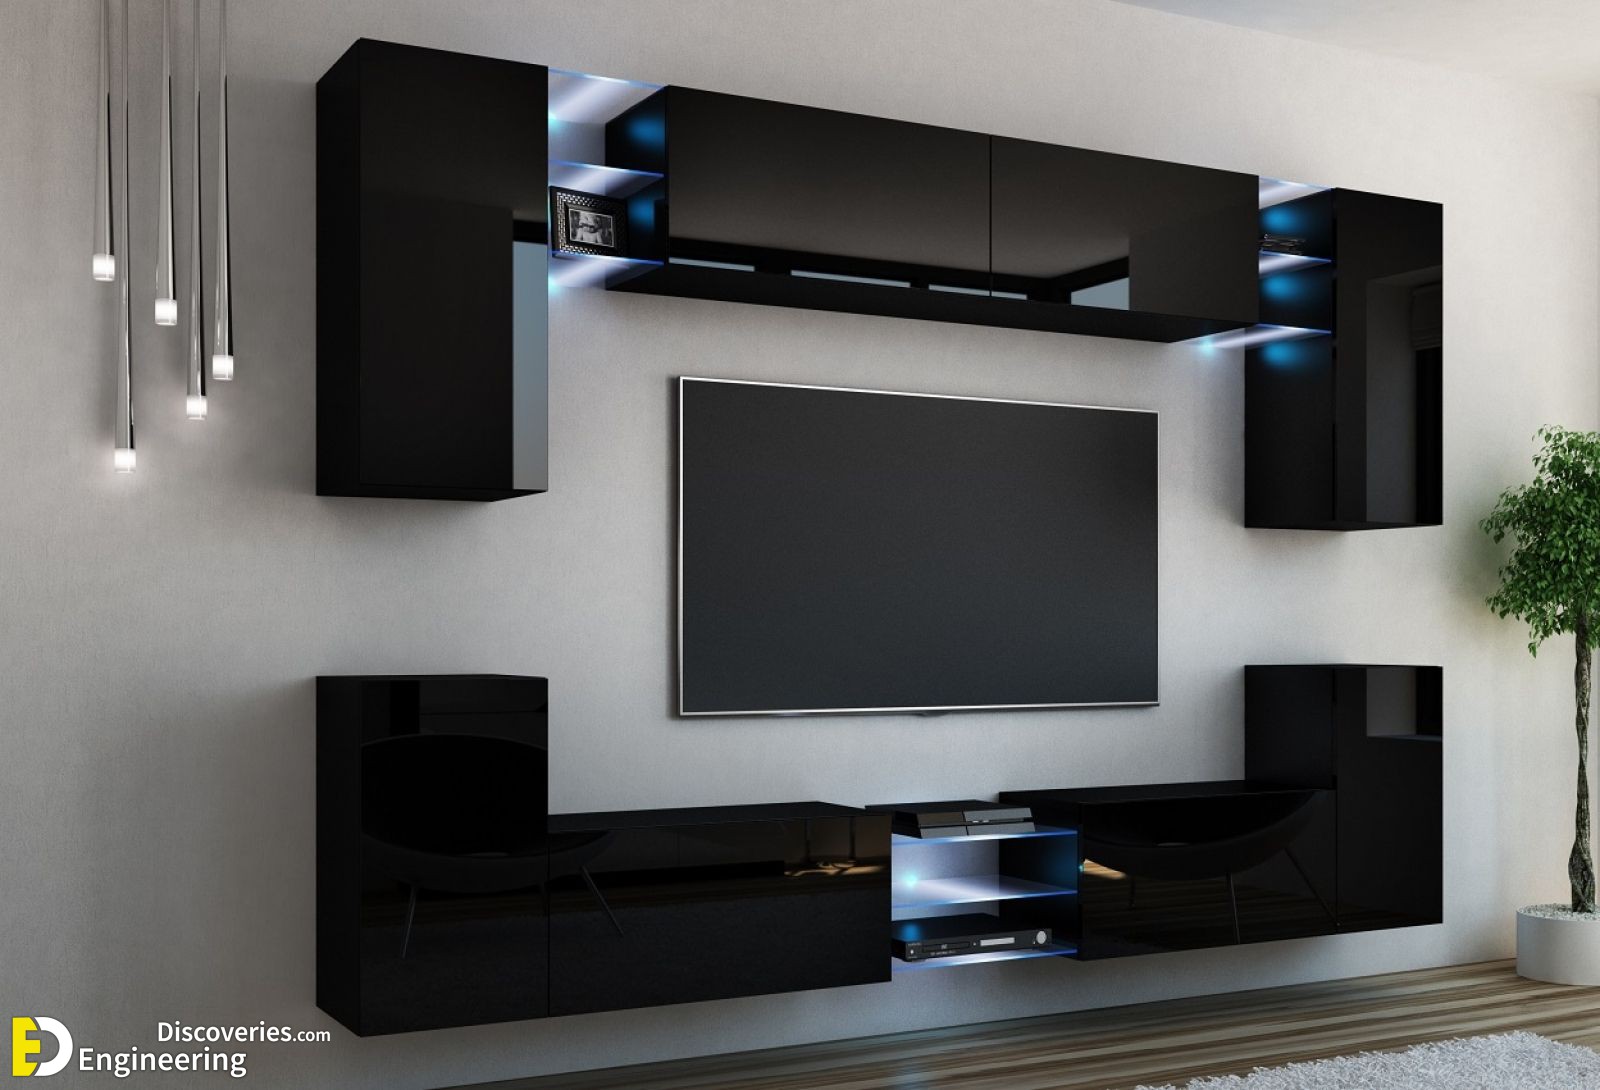 Top 50 Modern TV Stand Design Ideas For 2020 Engineering Discoveries